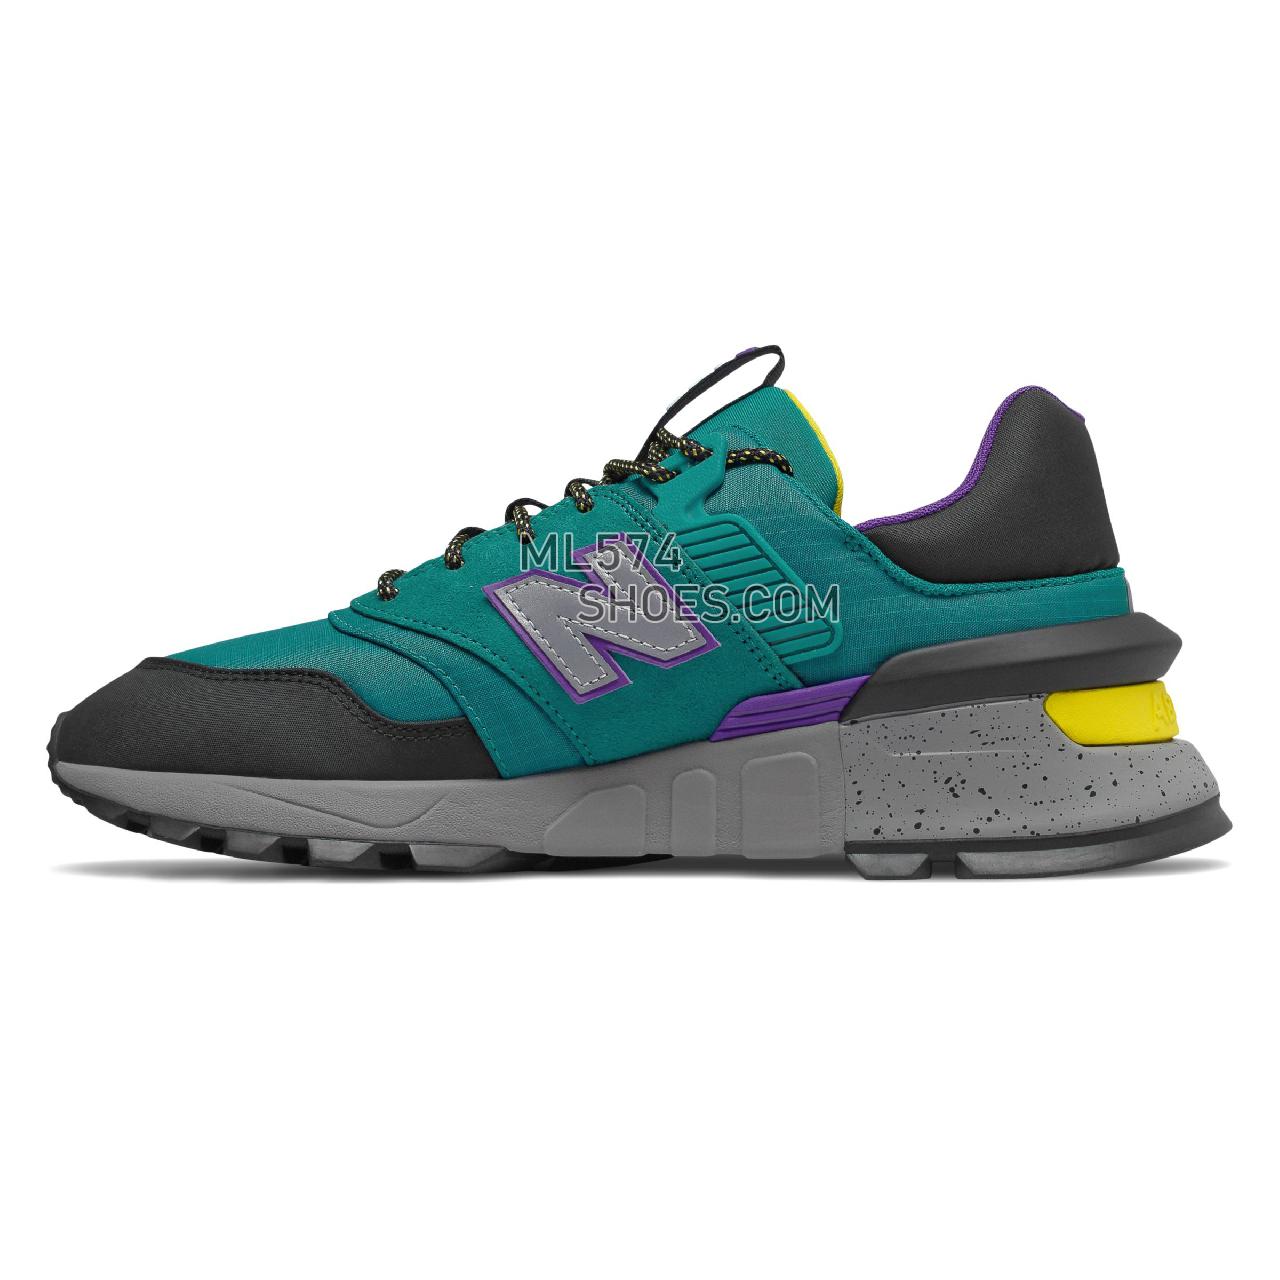 New Balance 997 Sport - Men's Sport Style Sneakers - Team Teal with Black and Yellow - MS997SKA